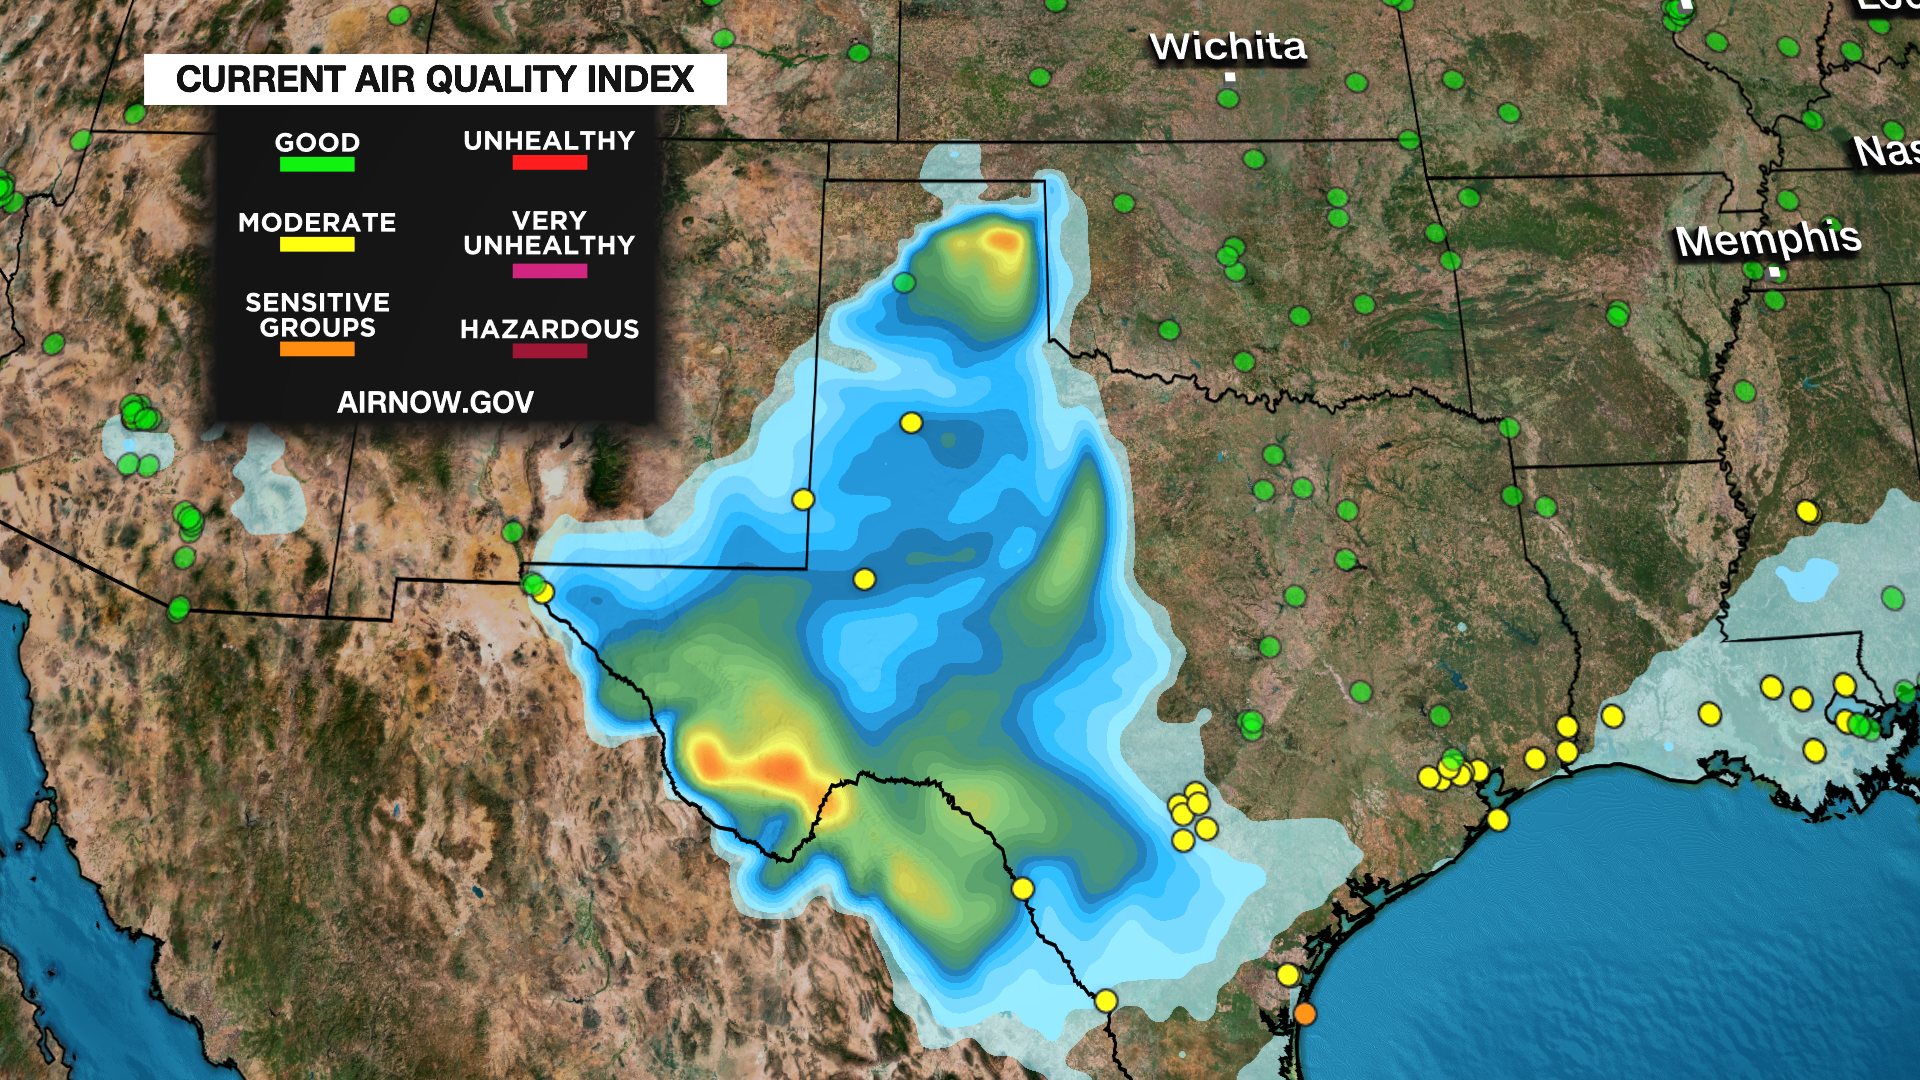 Air quality (represented by dots) and near-surface smoke (represented by blue to orange shading) across Texas as of early Wednesday afternoon.